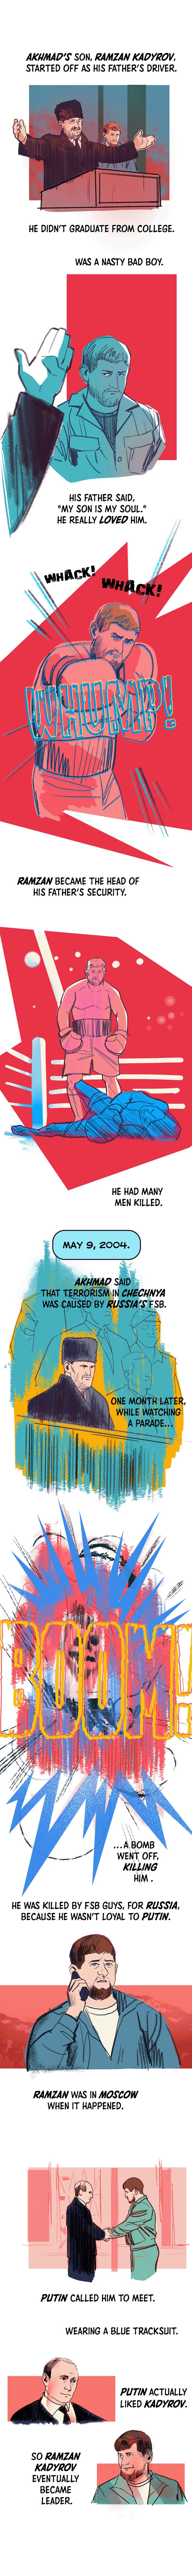 Akhmad’s son, Ramzan Kadyrov, started off as his father’s driver. He didn’t graduate from college. Was a nasty bad boy.  His father said, “My son is my soul.” He really loved him. Ramzan became the head of his father’s security. He had many men killed. May 9, 2004. Akhmad said that terrorism in Chechnya was caused by Russia’s FSB. One month later, while watching a parade, a bomb went off, killing him. He was killed by FSB guys, for Russia, because he wasn’t loyal to Putin. Ramzan was in Moscow when it happened. Putin called him to meet. Wearing a blue tracksuit. Putin actually liked Kadyrov. So Ramzan Kadyrov eventually became leader.